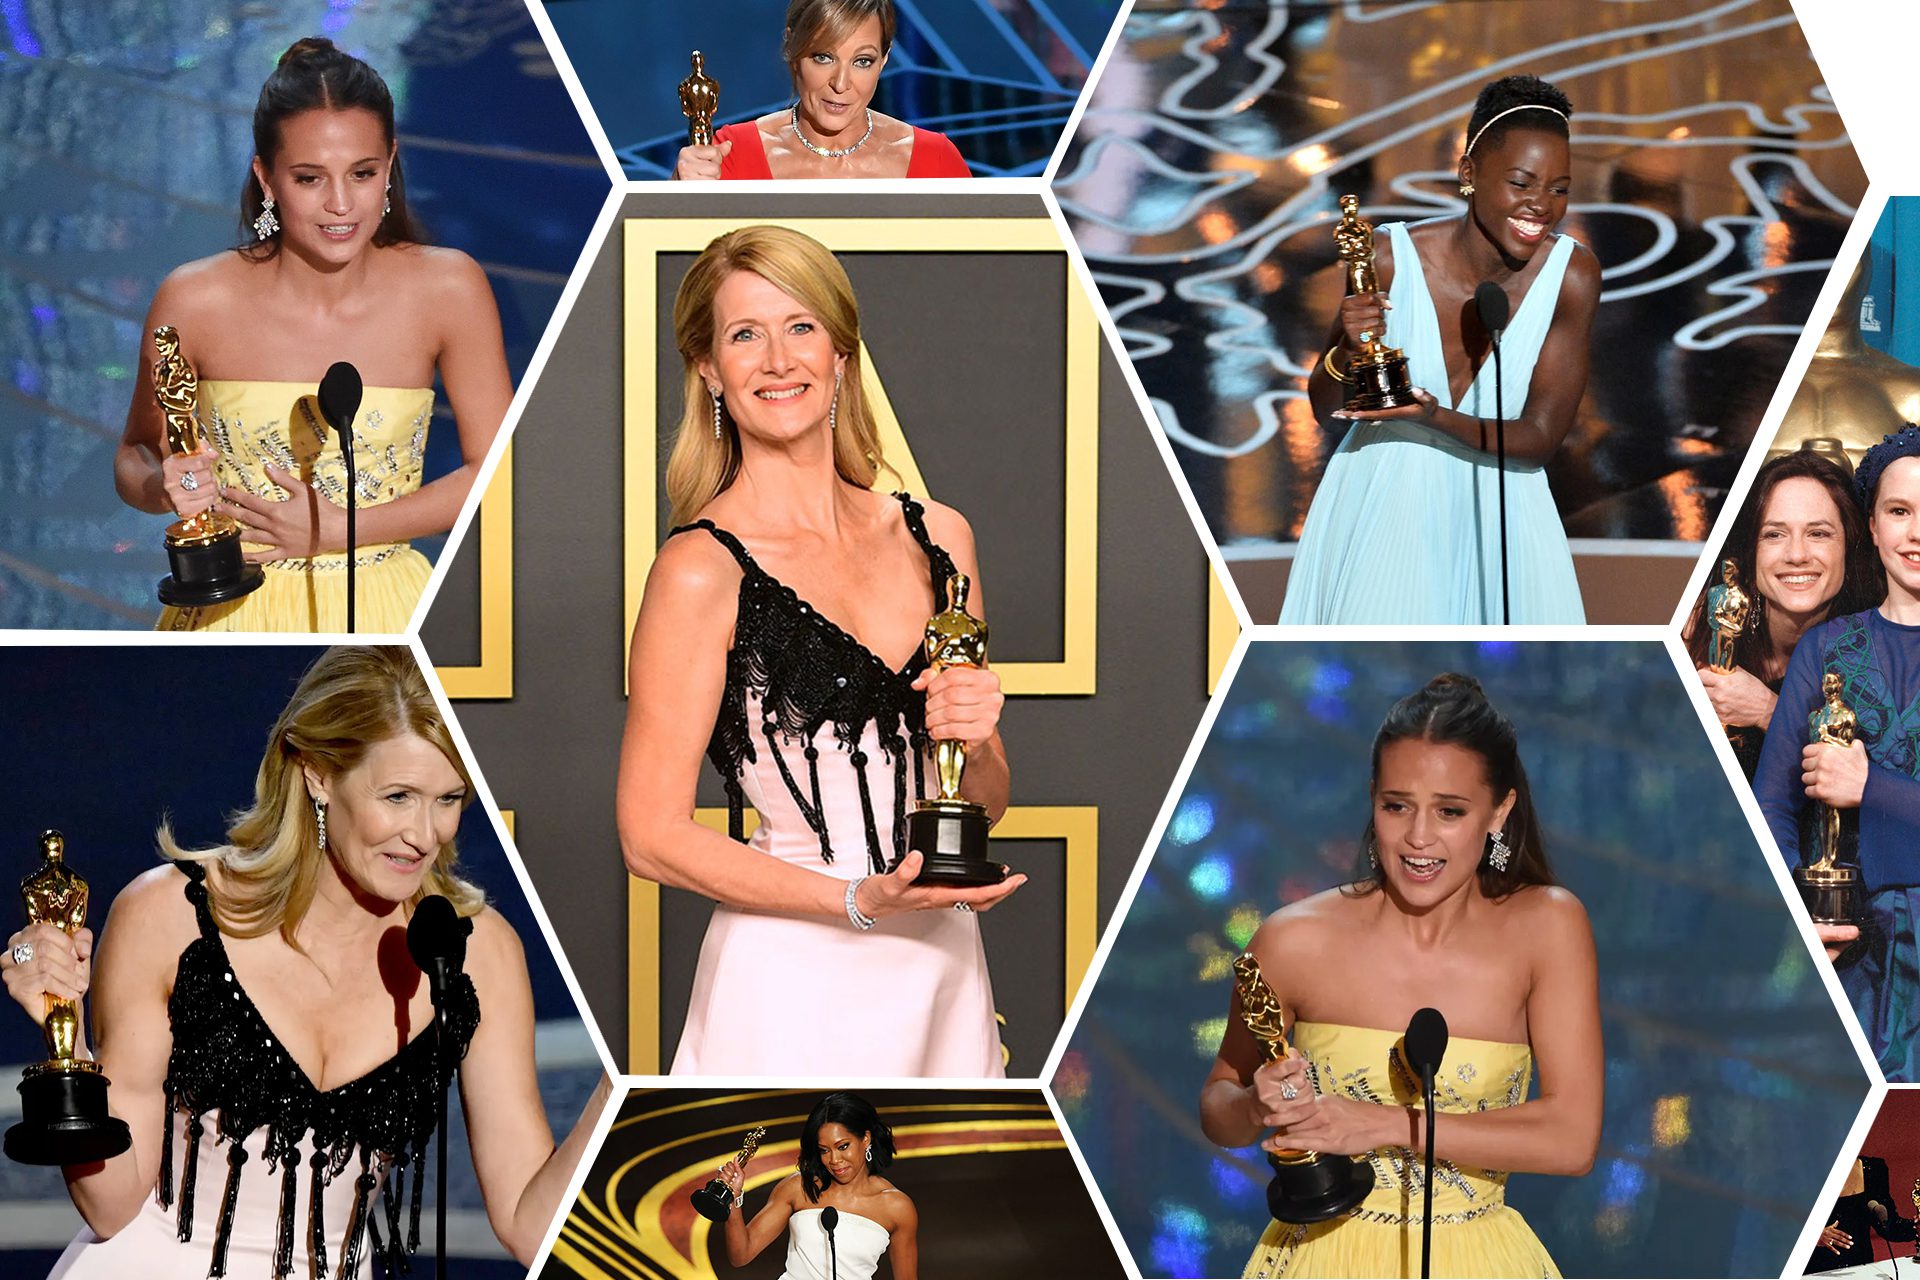 Academy Award For Best Supporting Actress Complete Guide To The Award